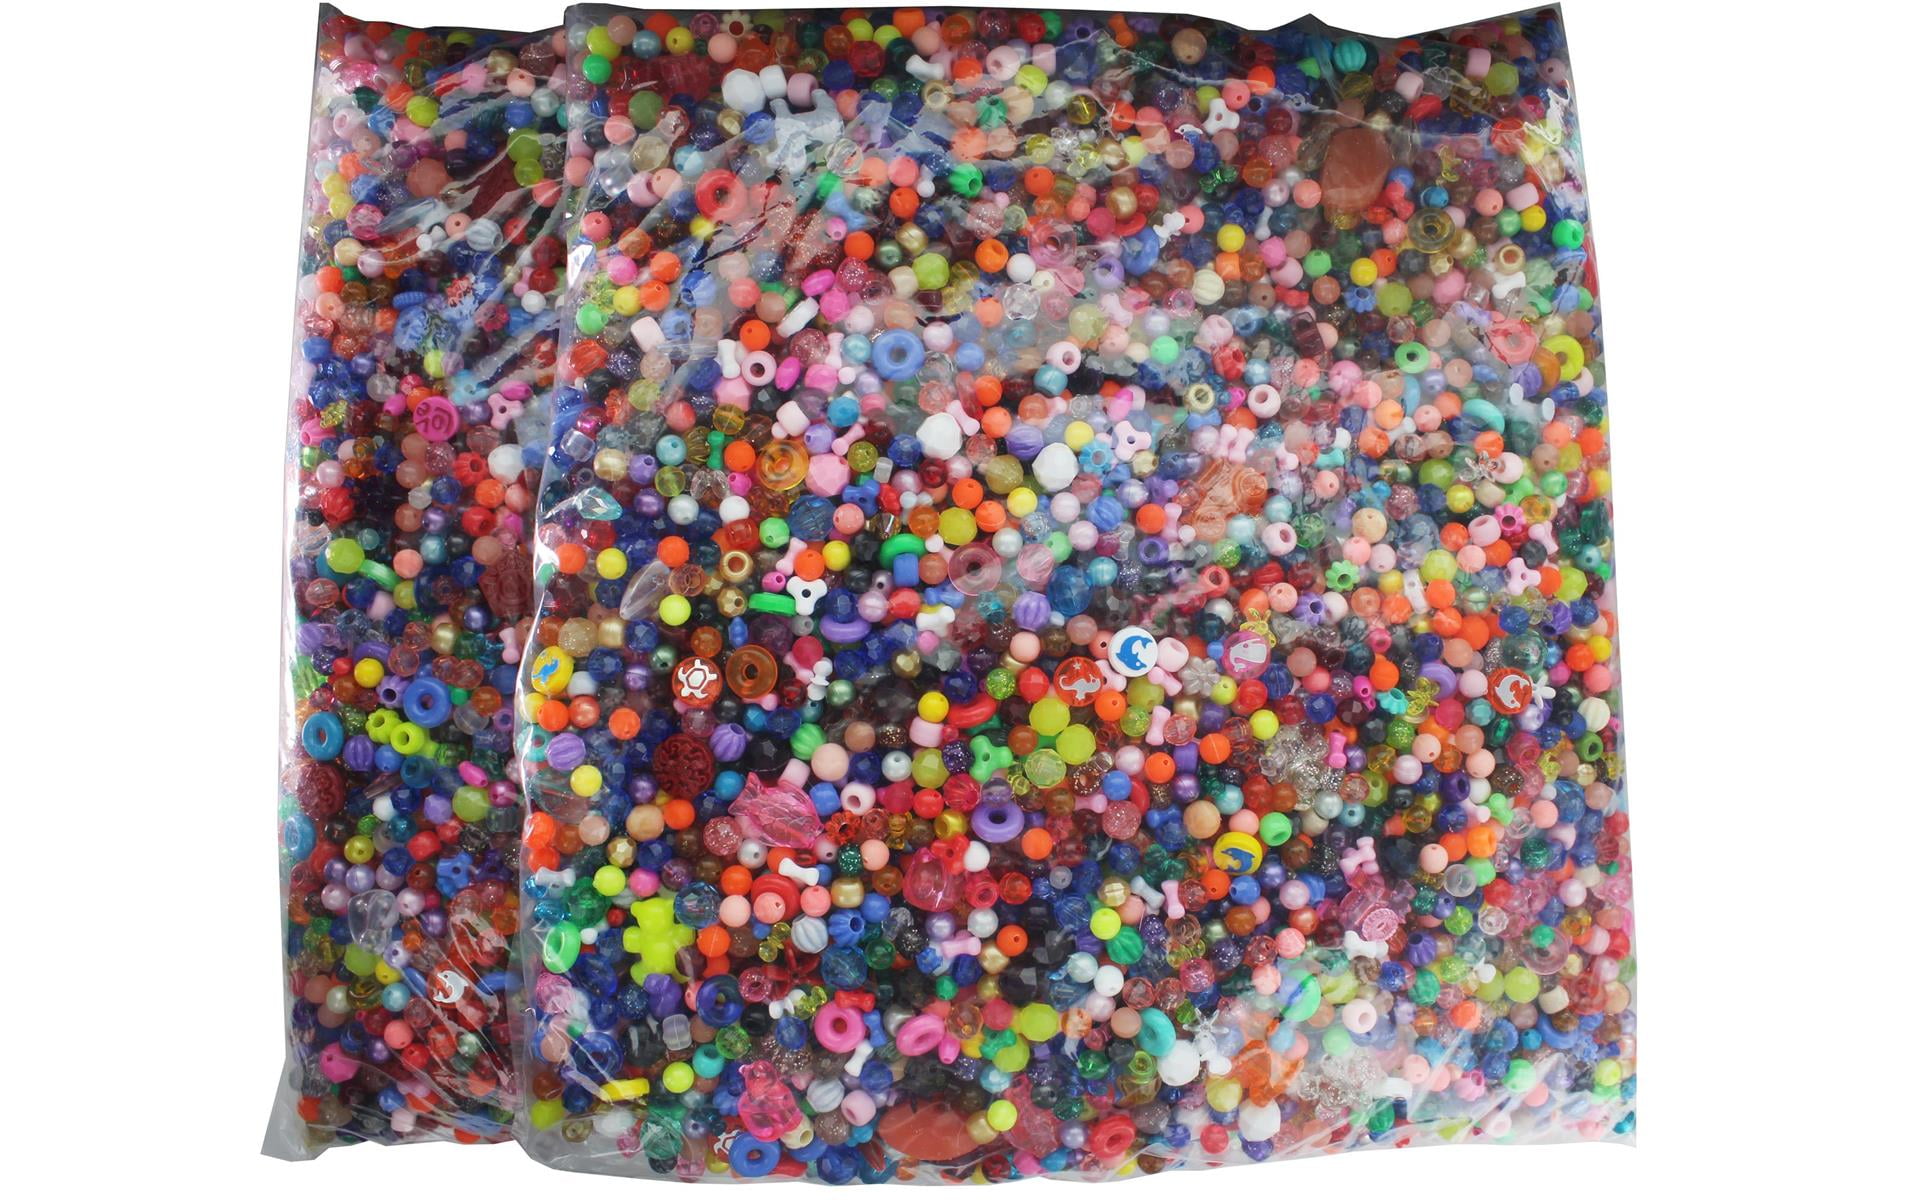 Stock Beads/Random Mixed Beads 500g/bag (Can't Pick )